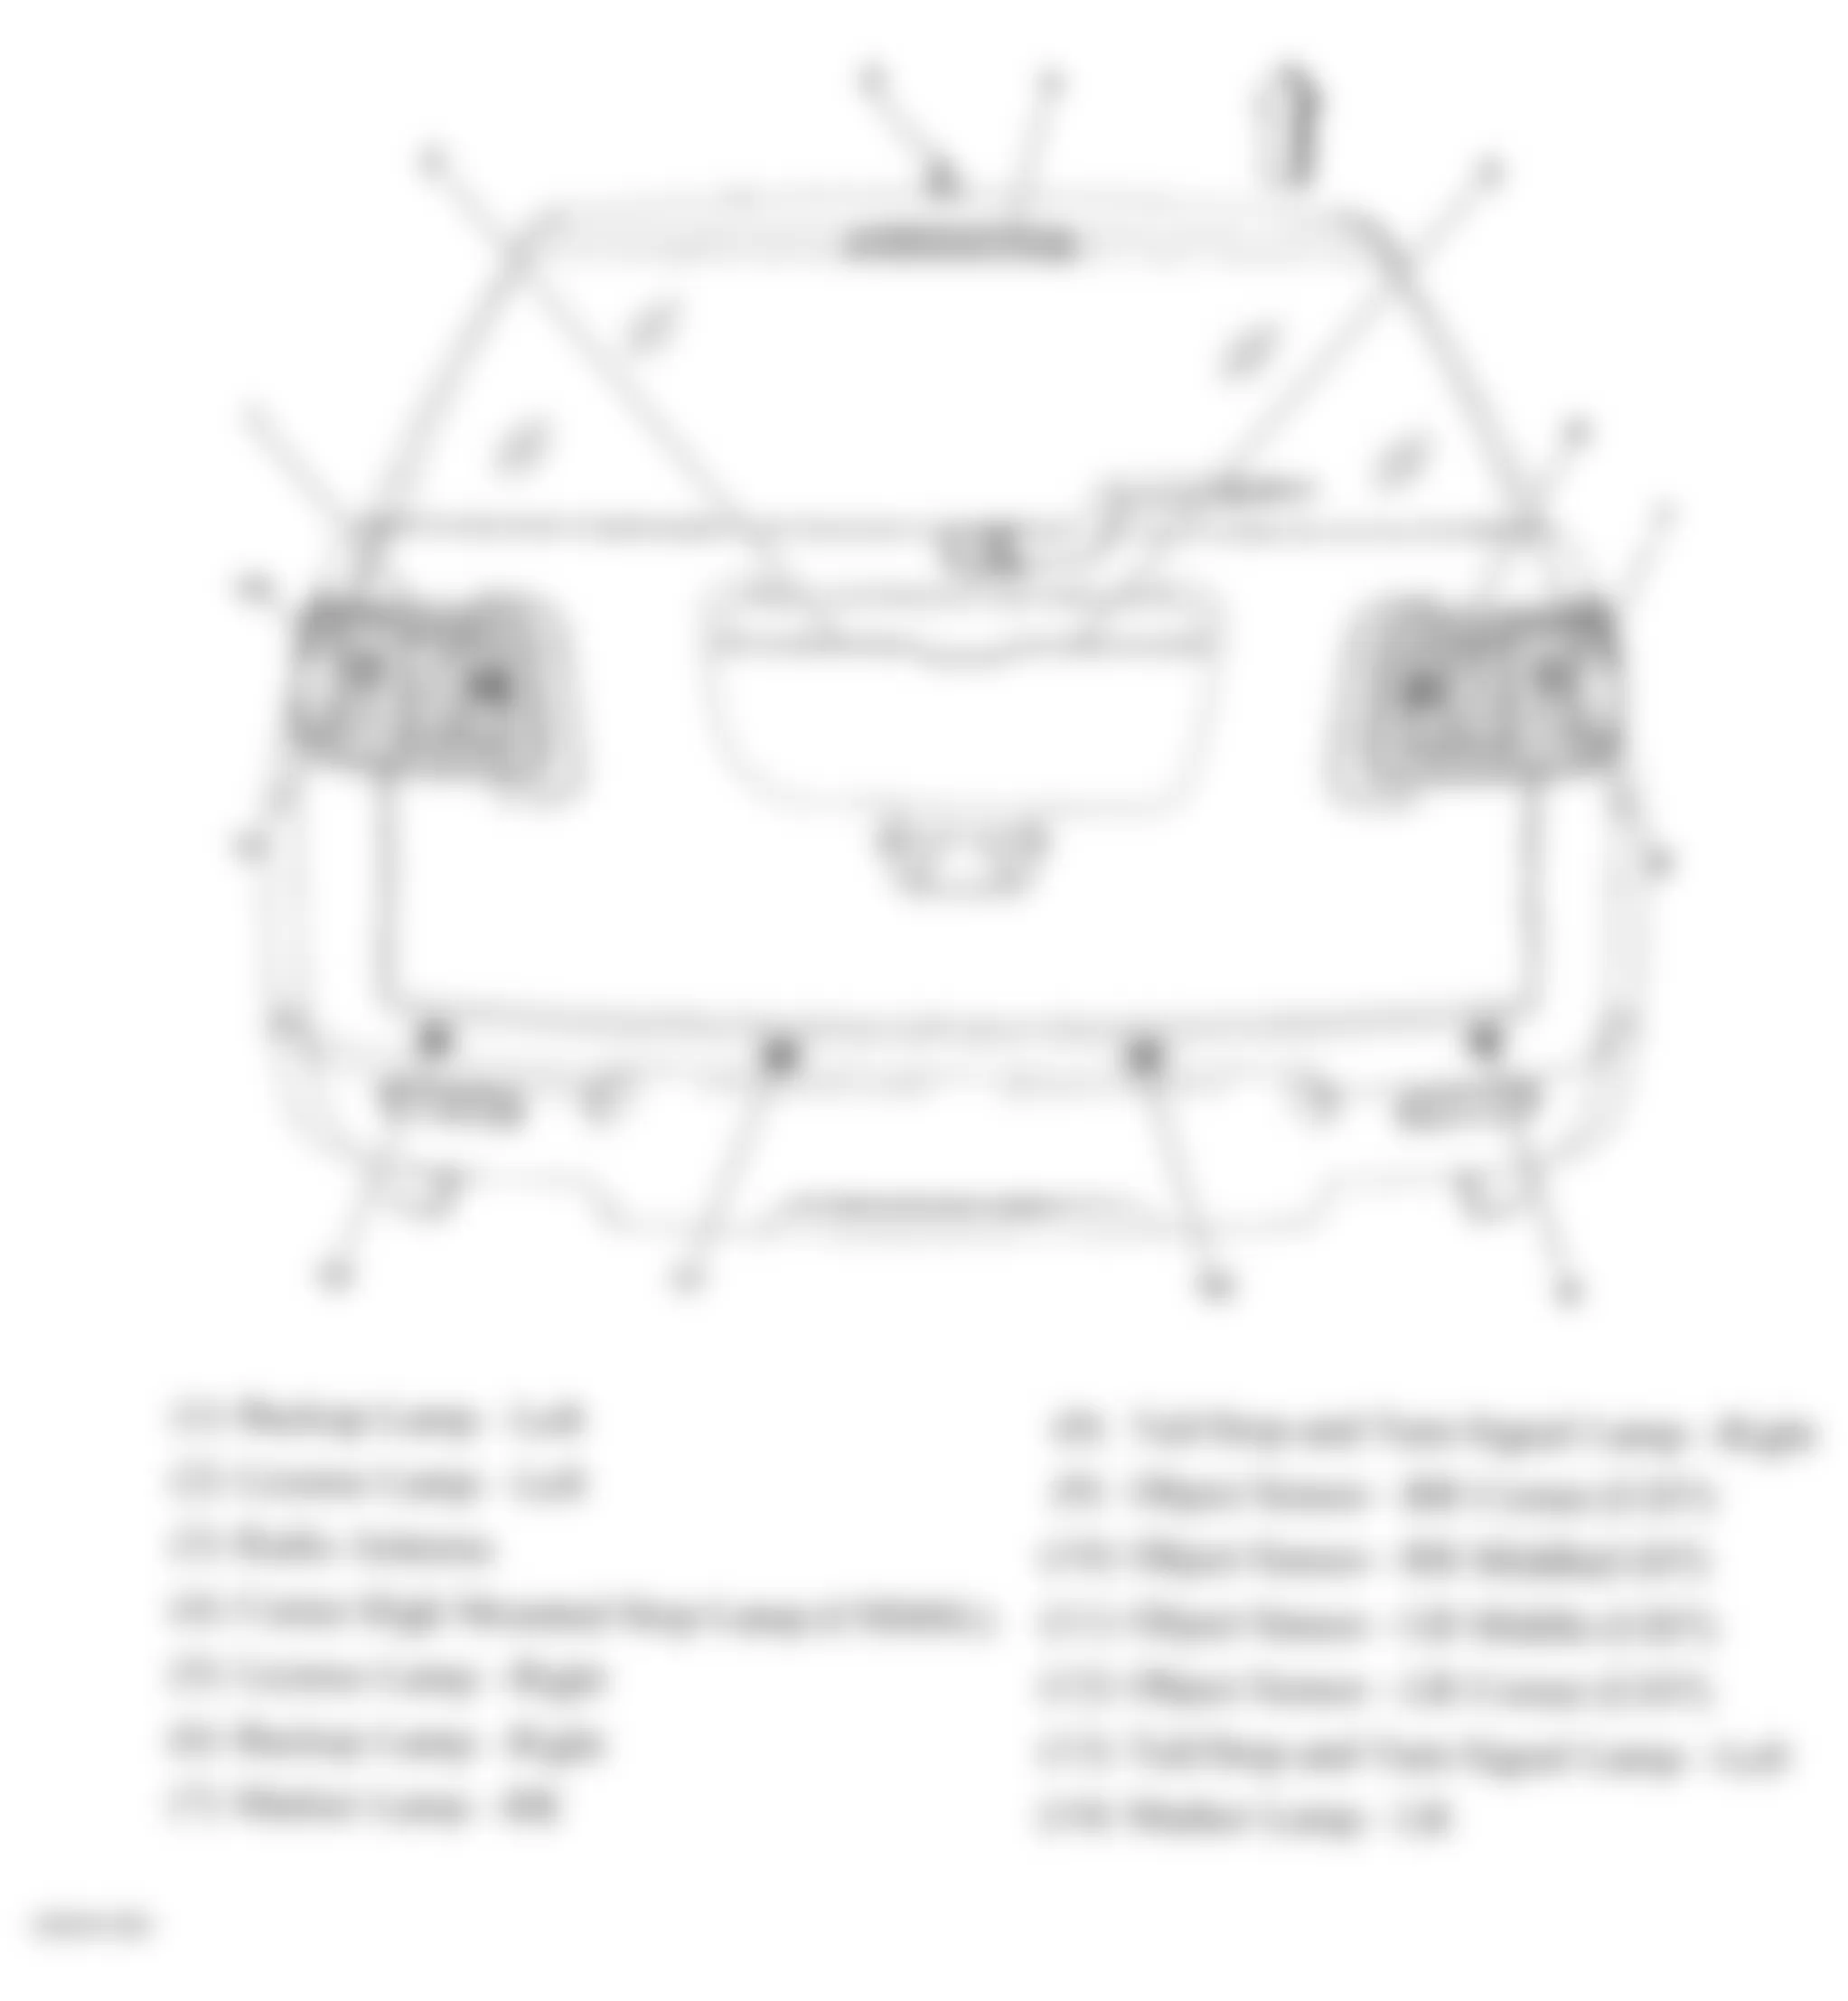 Buick Enclave CXL 2008 - Component Locations -  Rear Of Vehicle (Acadia & Outlook)